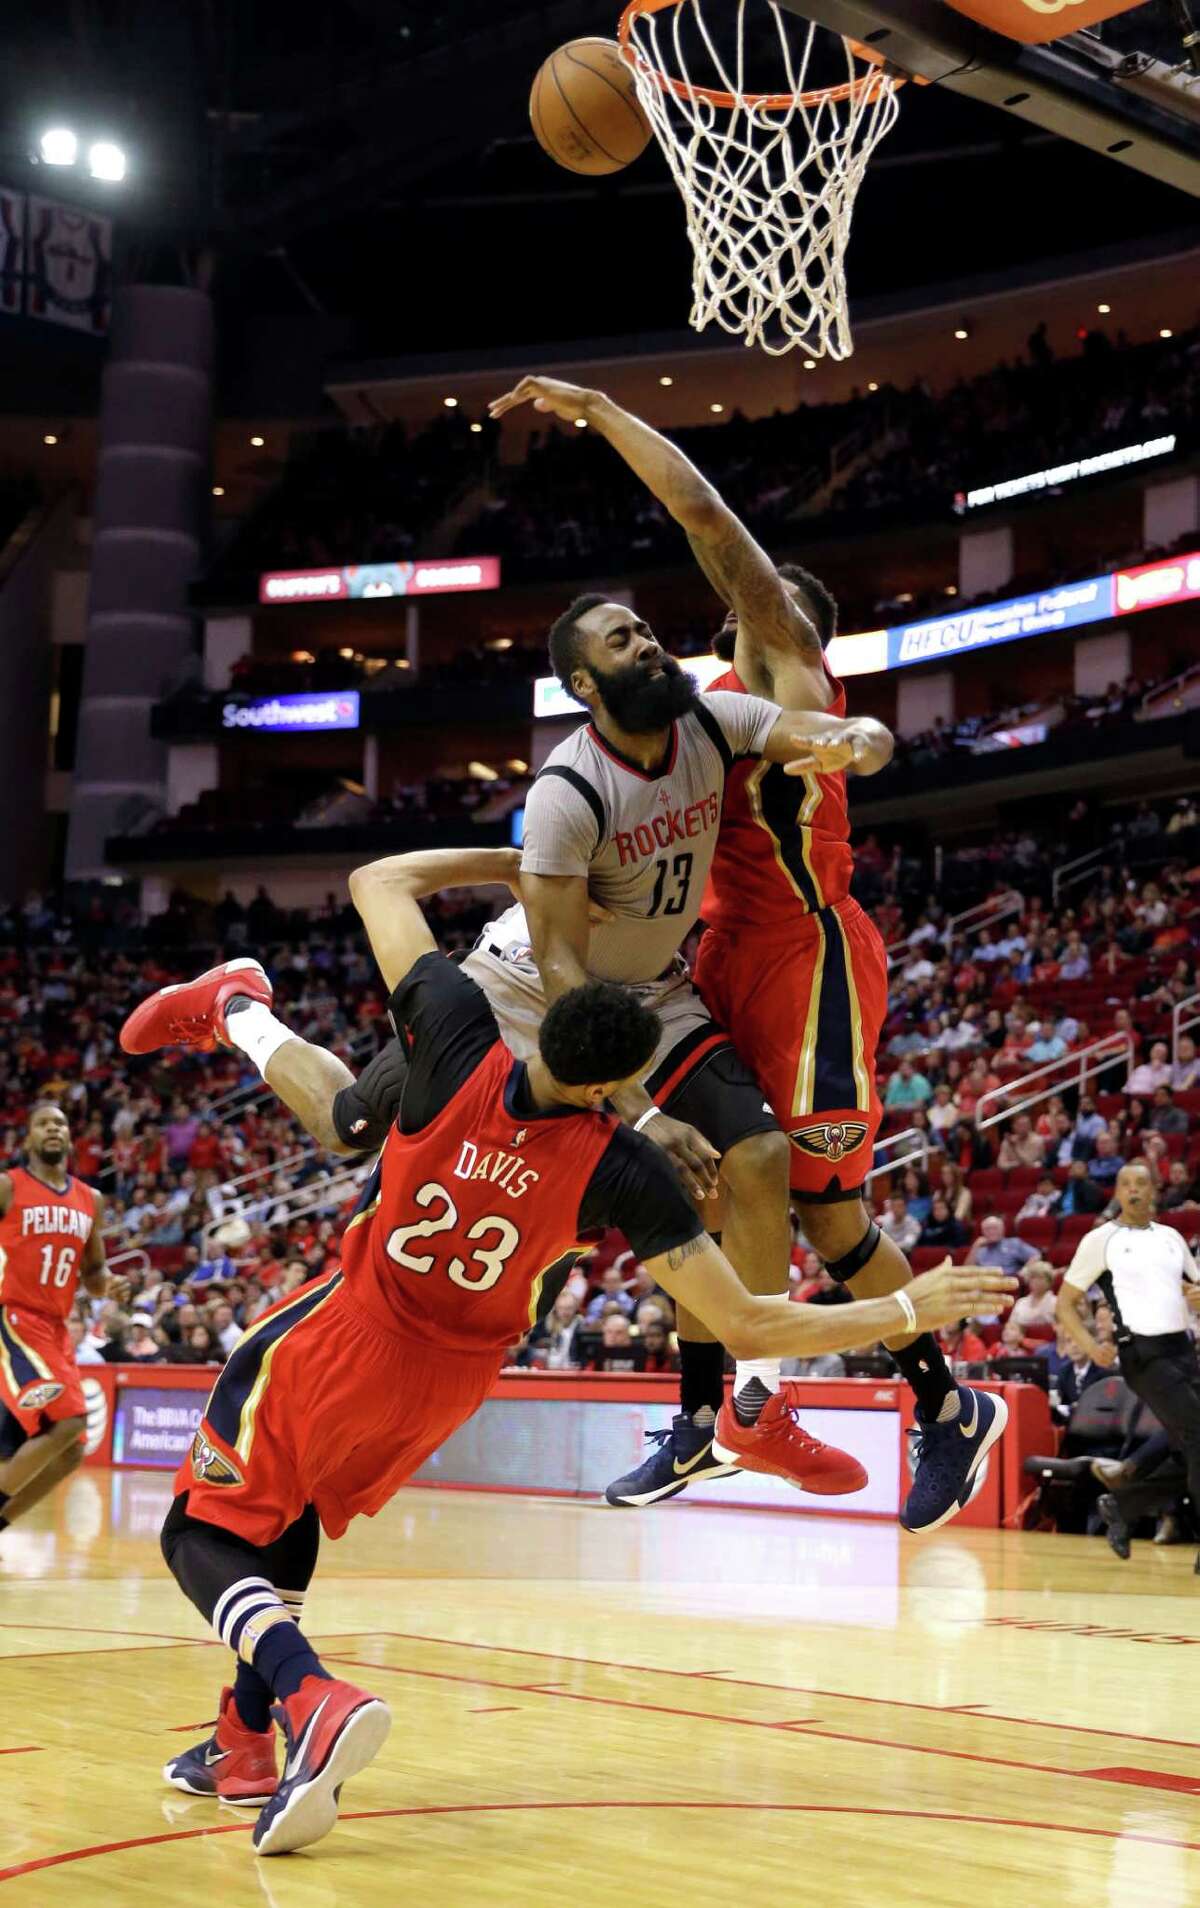 Houston Rockets' James Harden (13) charges into New Orleans Pelicans' Anthony Davis (23) as Alonzo Gee, right, helps defend during the second half of an NBA basketball game Wednesday, March 2, 2016, in Houston. Houston won 100-95. (AP Photo/David J. Phillip)